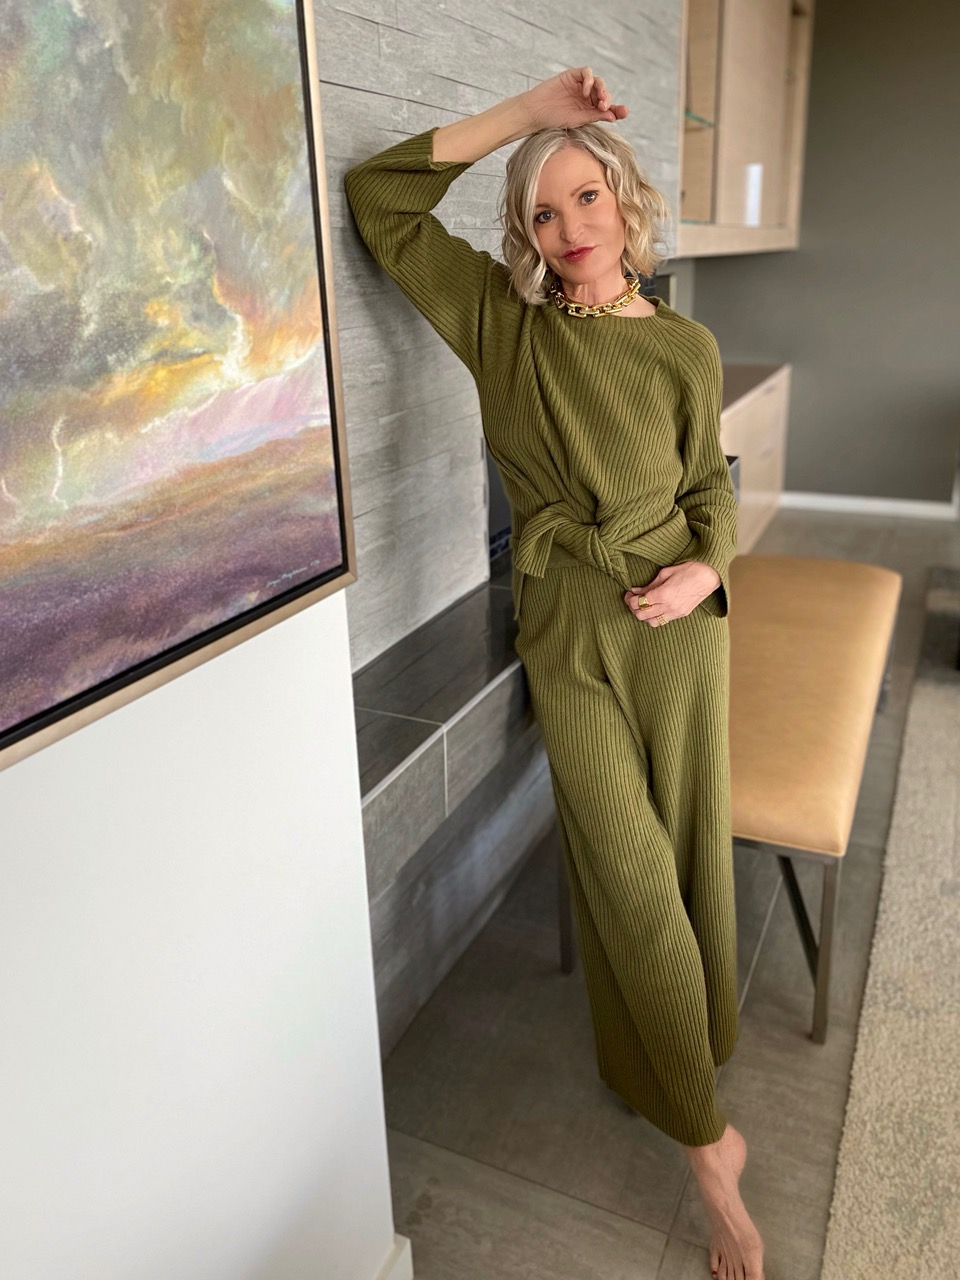 Lifestyle Influencer, Jamie Lewinger of More Than Turquoise, wearing NAP cashmere loungewear in olive.